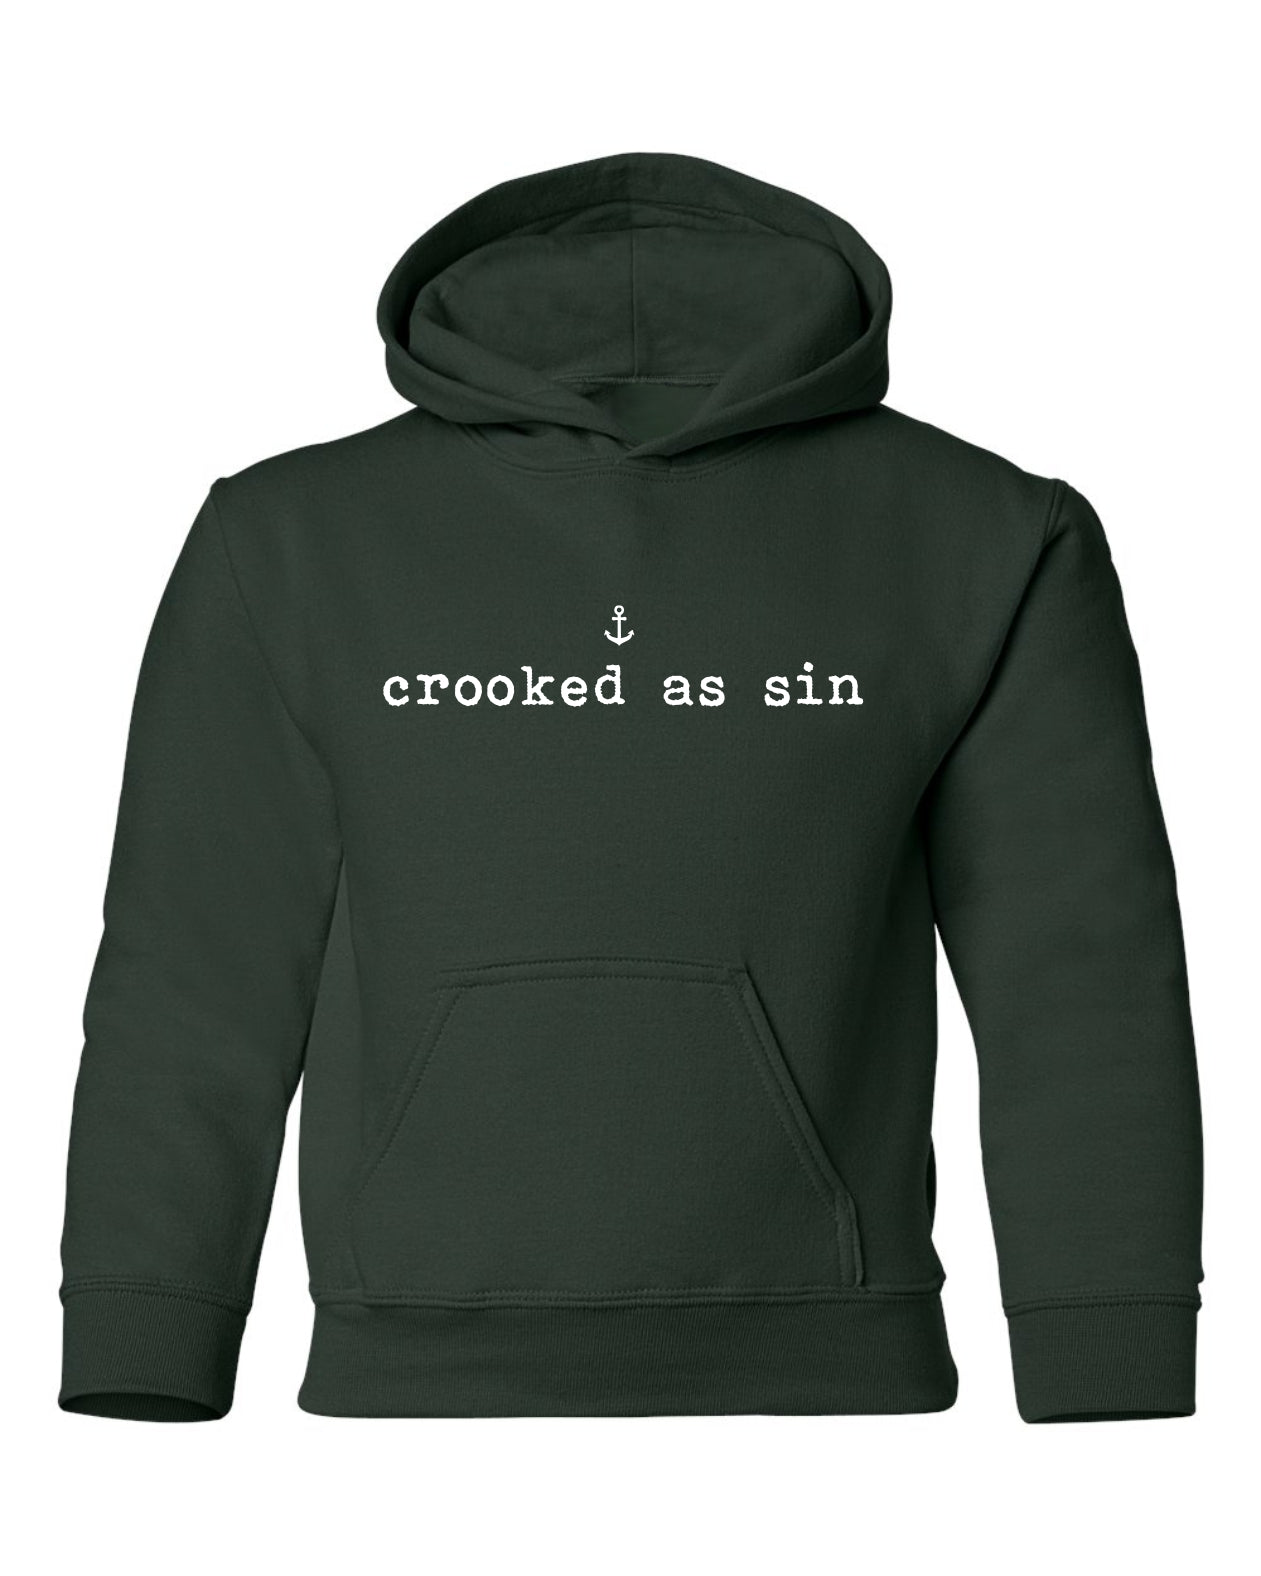 "Crooked As Sin" Youth Hoodie